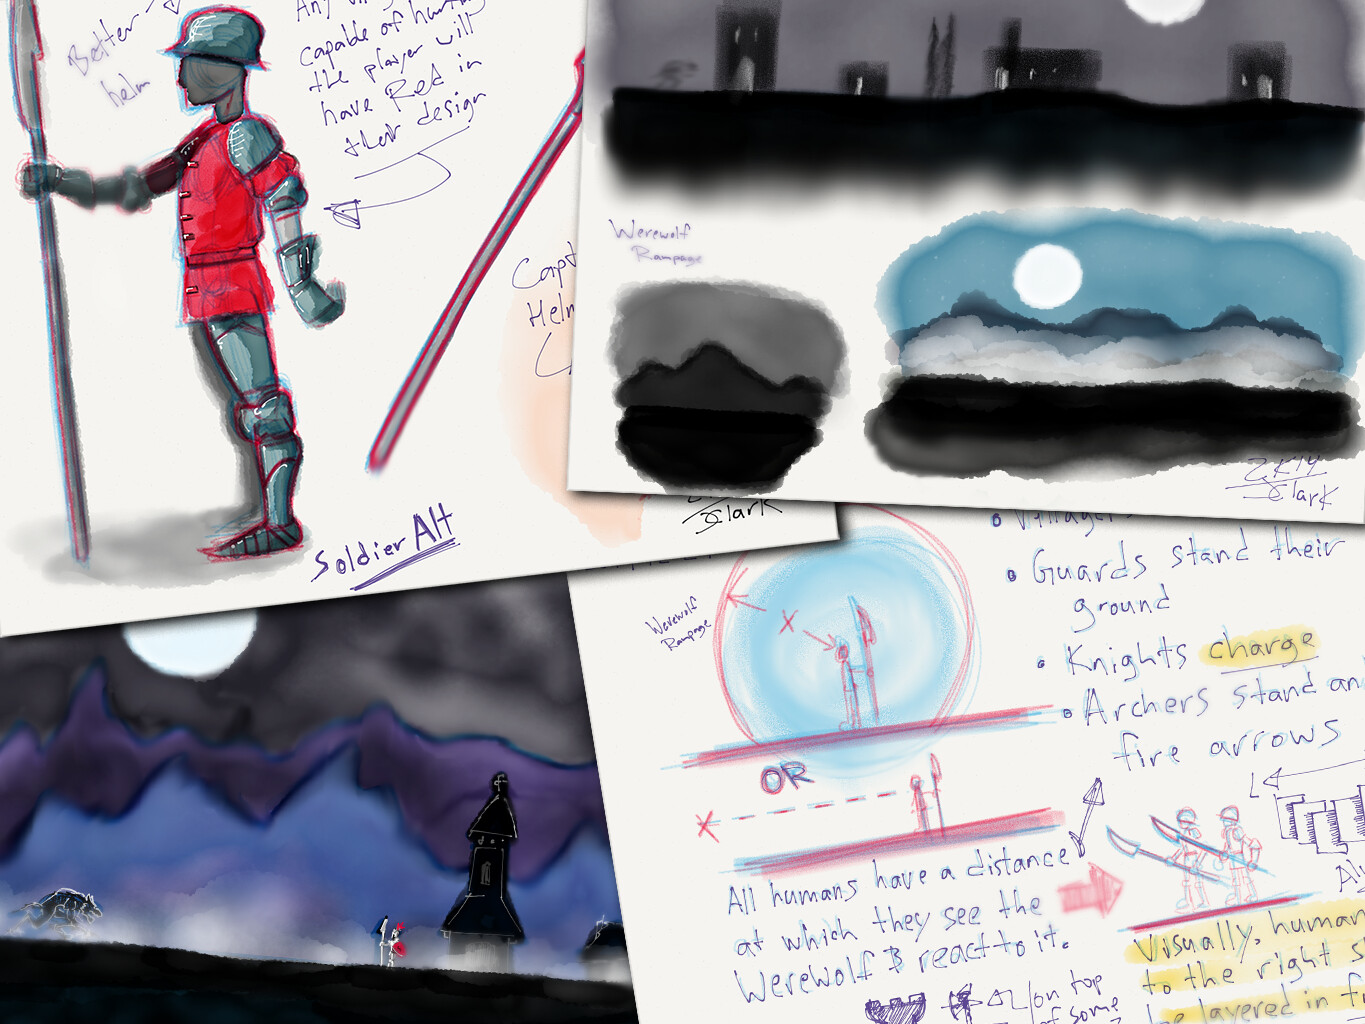 A sampling of the notes and sketches I made for this project.